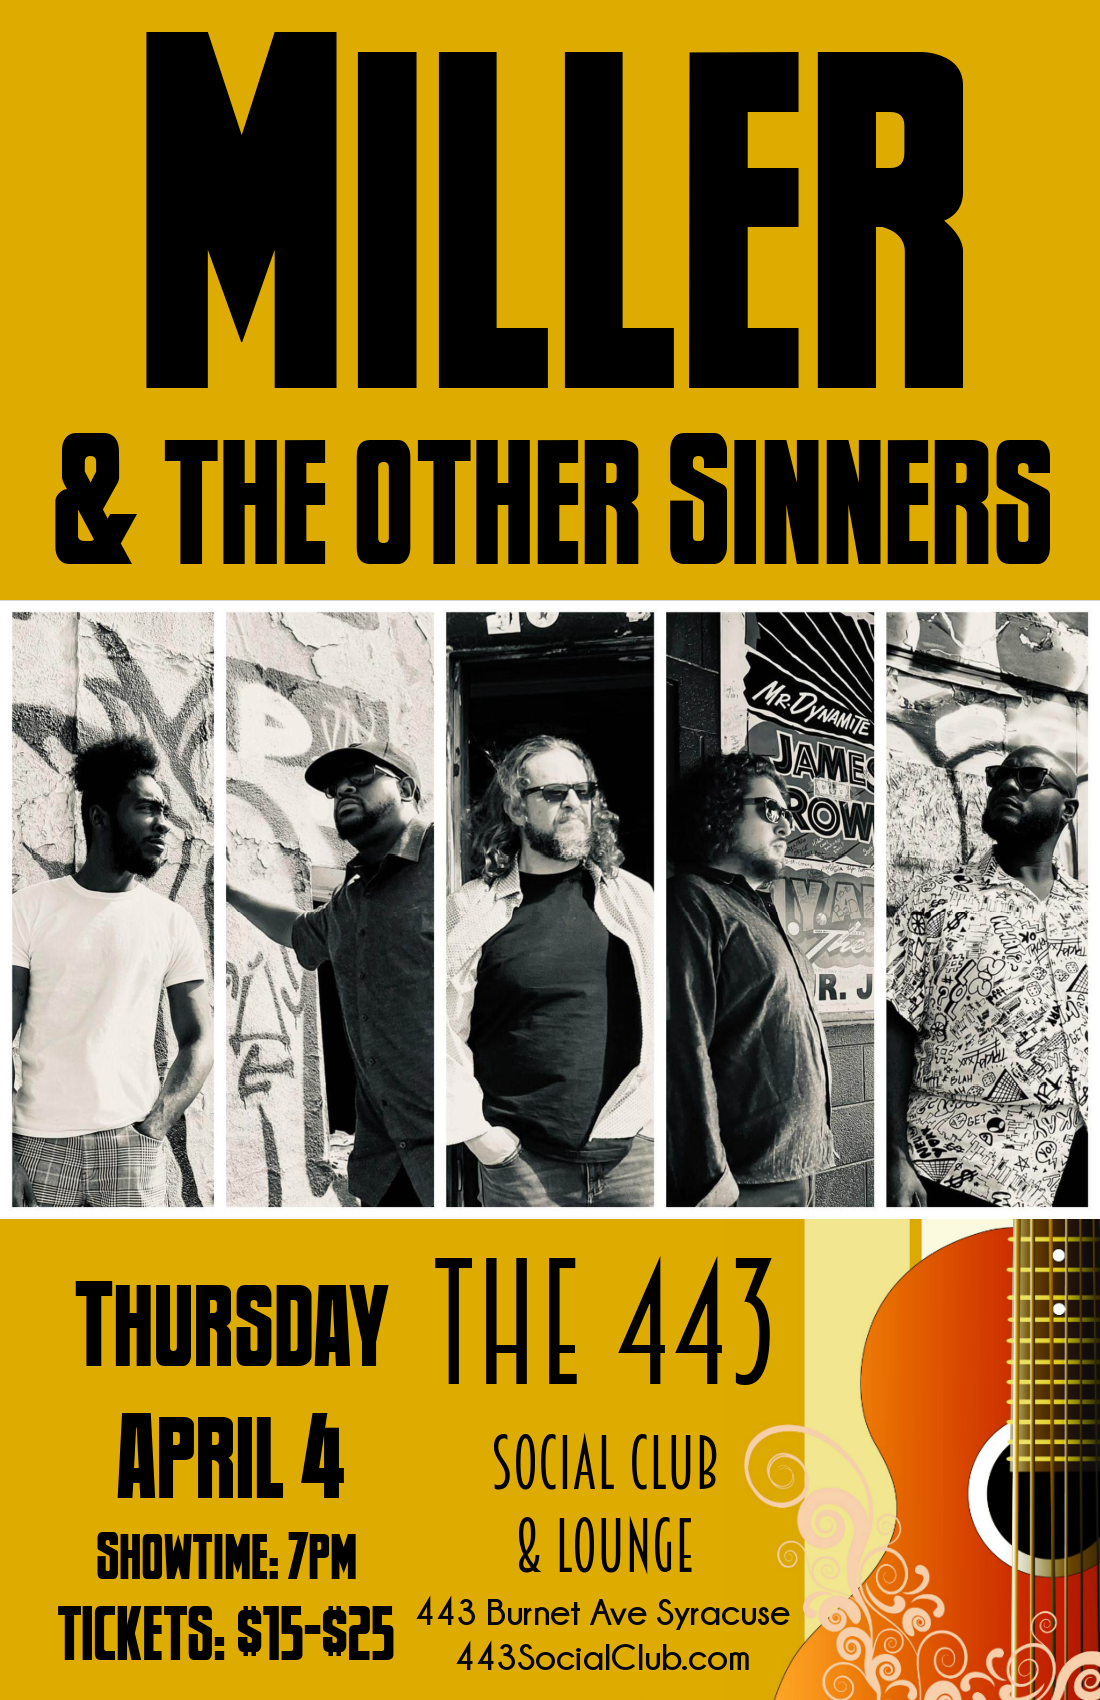 Miller & the Other Sinners